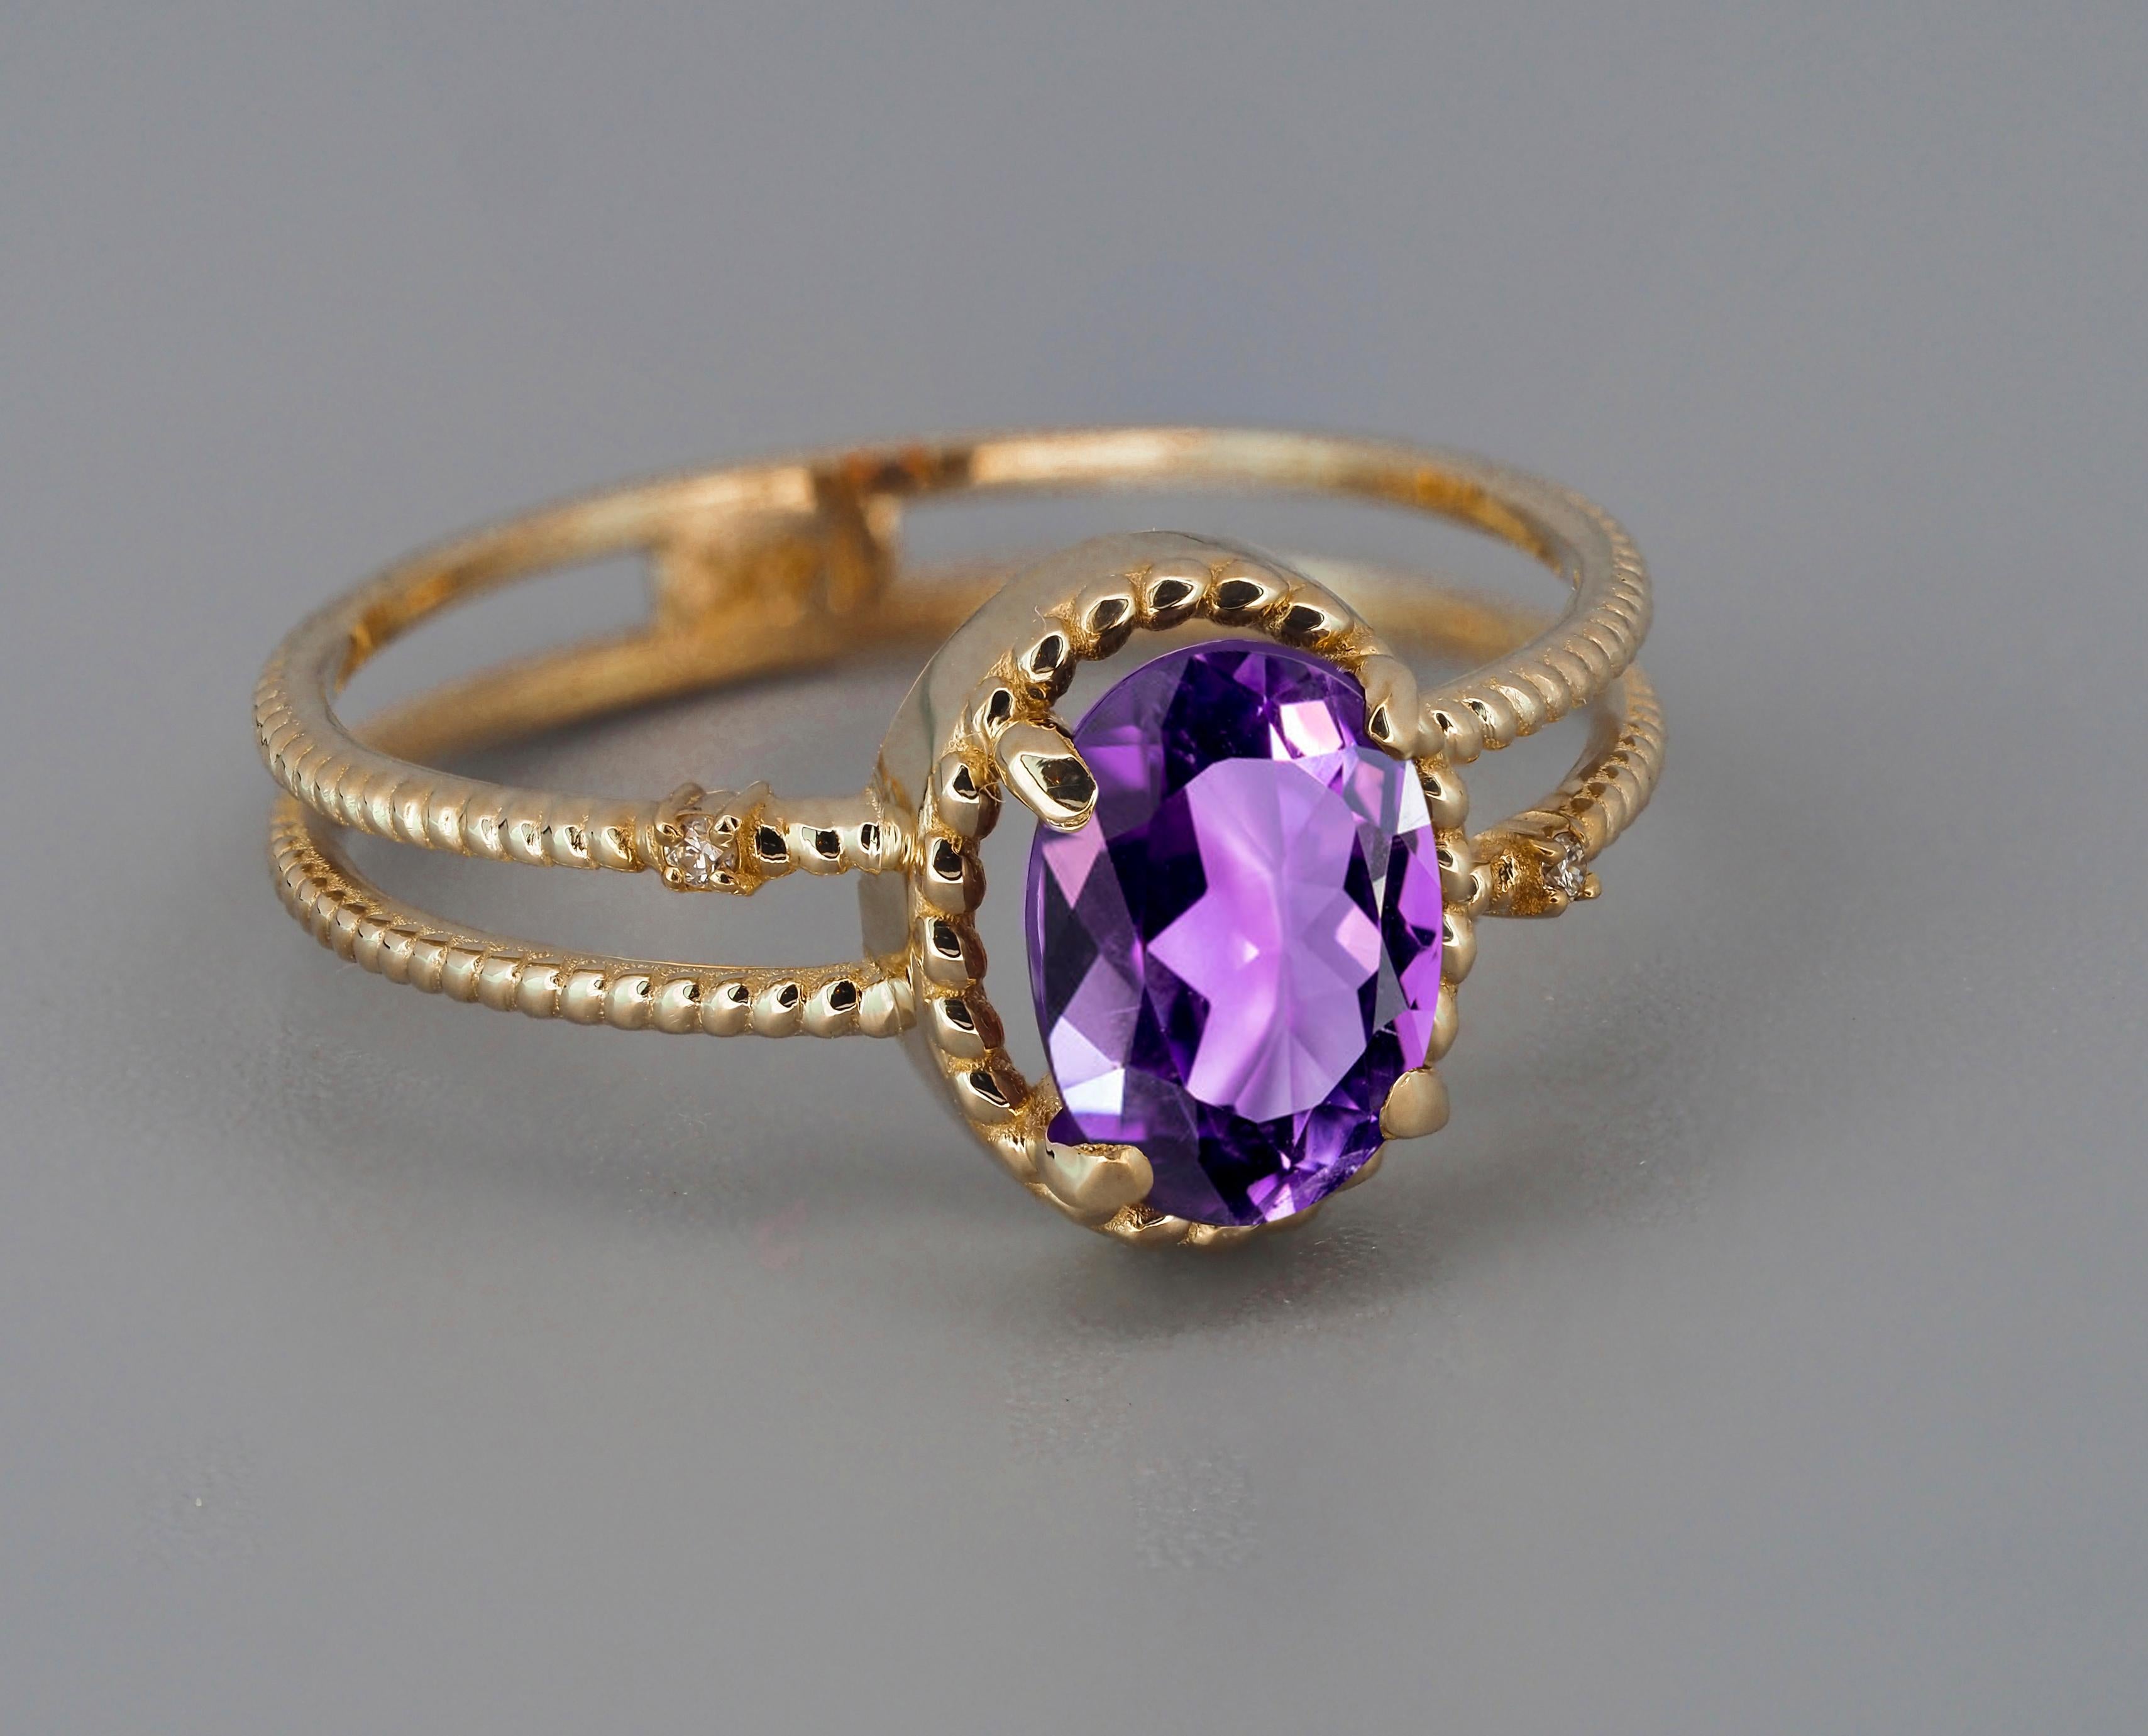 For Sale:  Amethyst Gold Ring, Oval Amethyst Ring, 14k Gold Ring with Amethyst 3